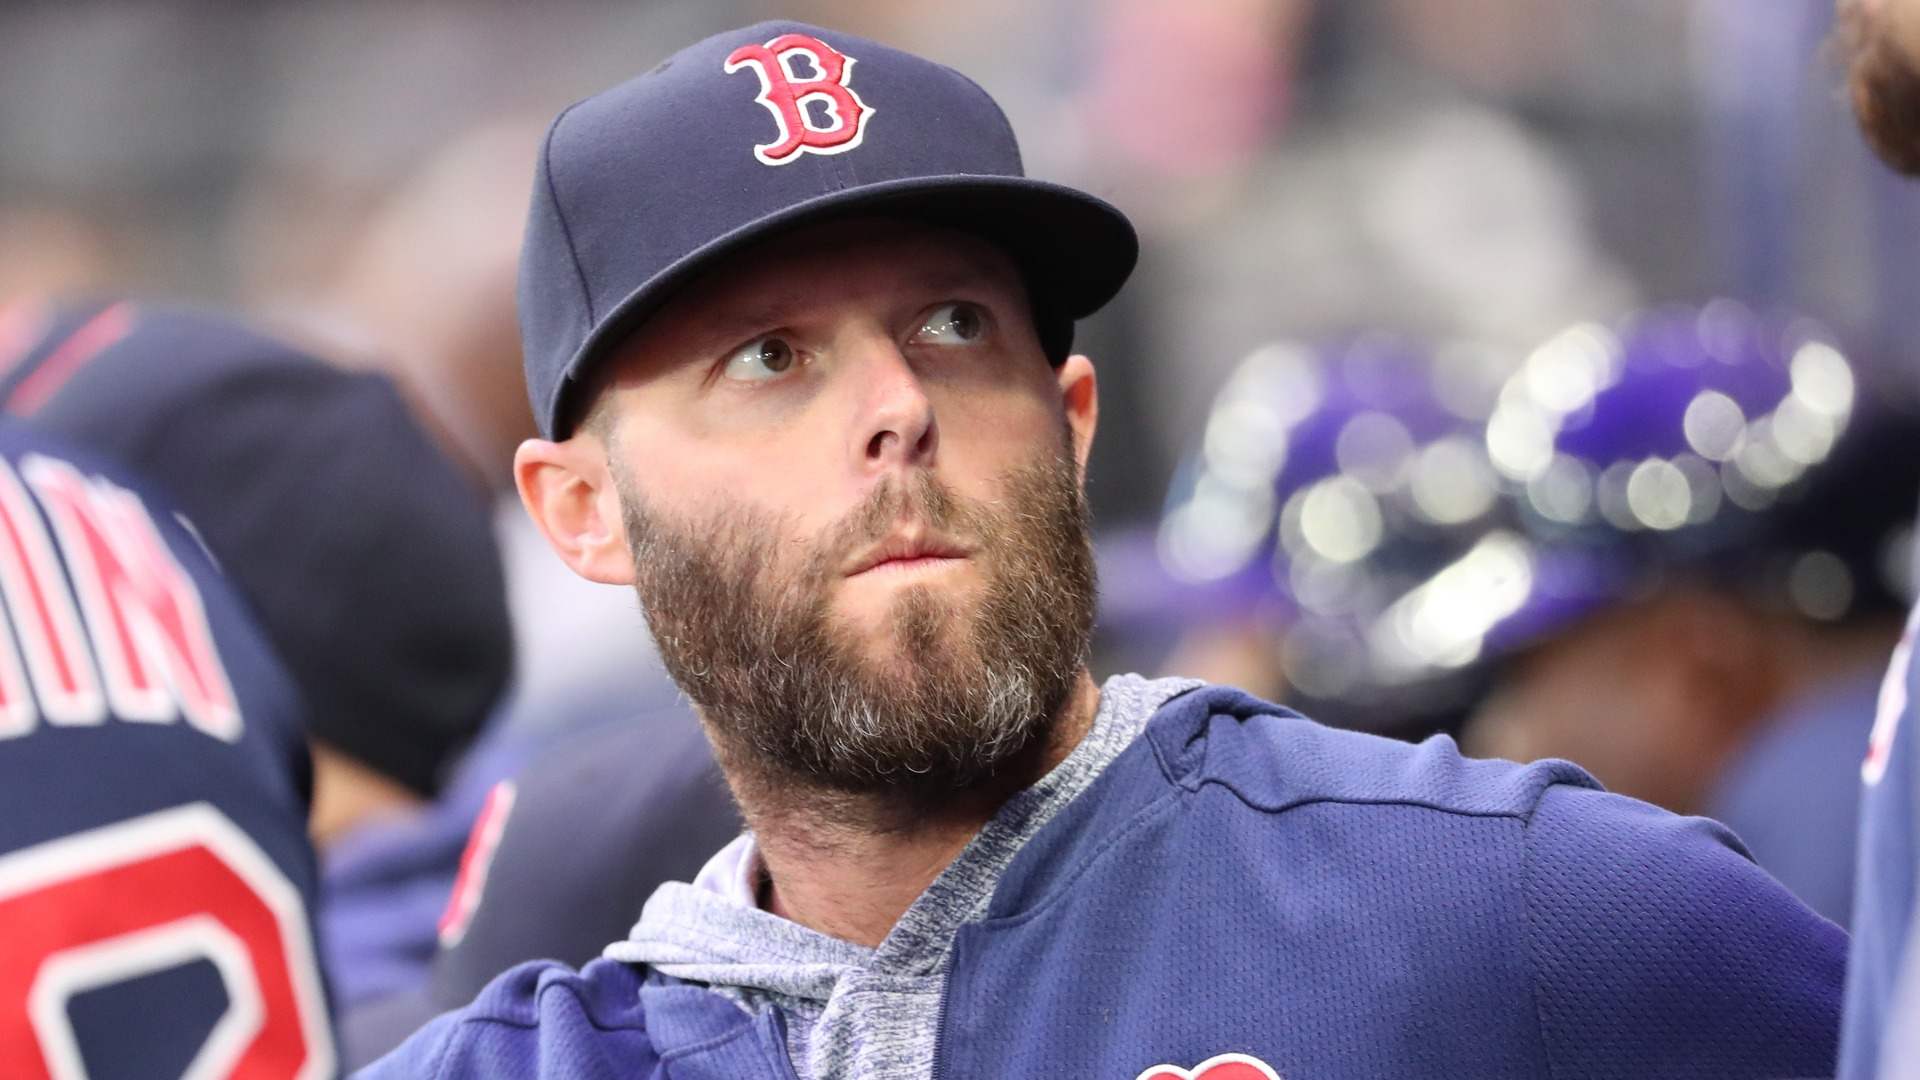 Does Dustin Pedroia Ever Want To Be Manager Of Red Sox?